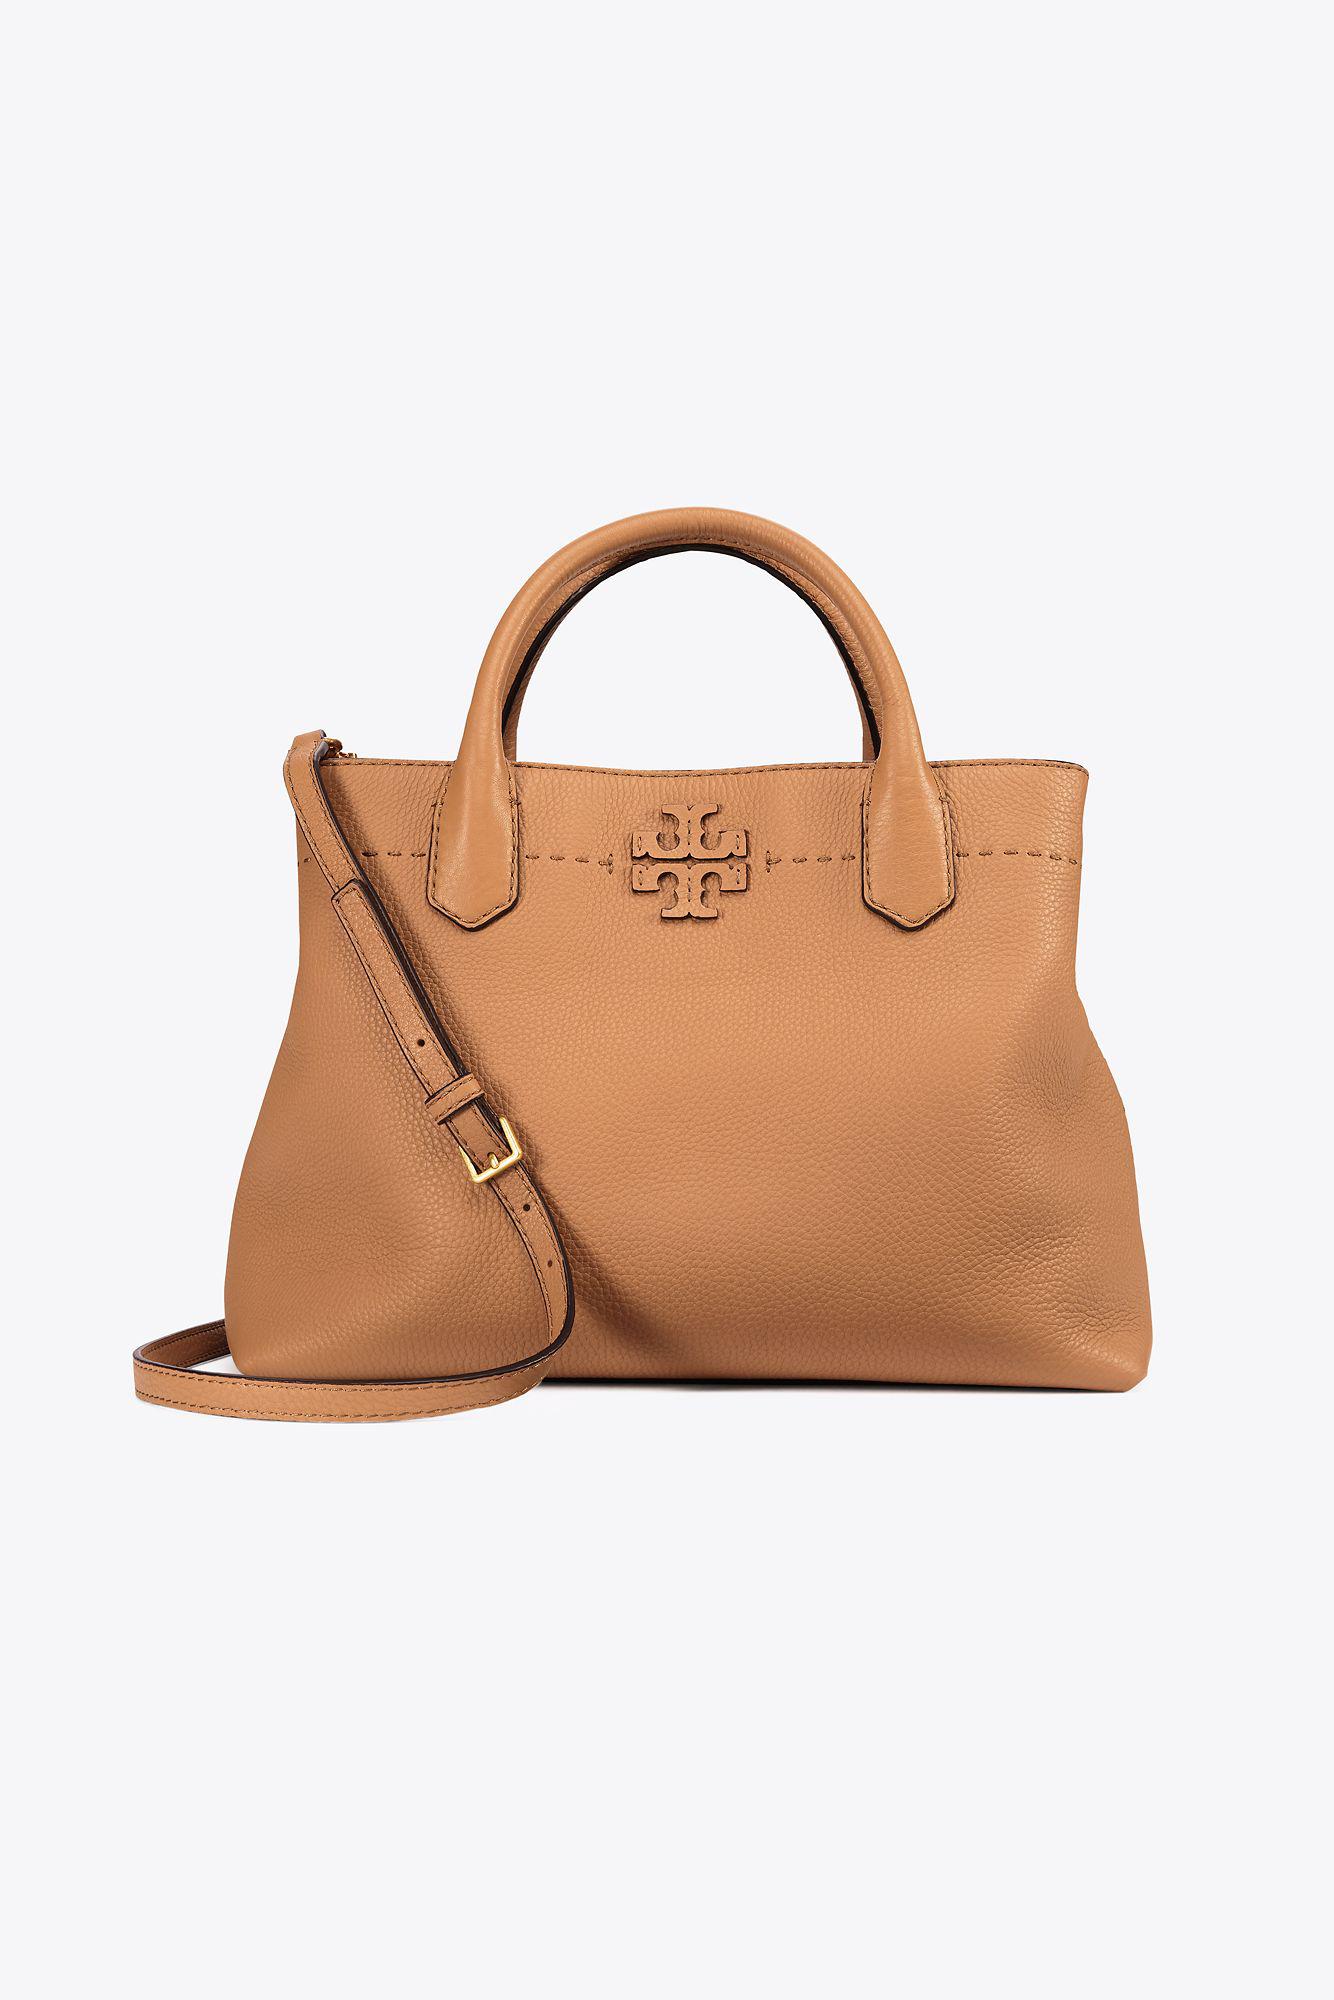 Tory Burch Mcgraw Triple-compartment Tote in Brown | Lyst